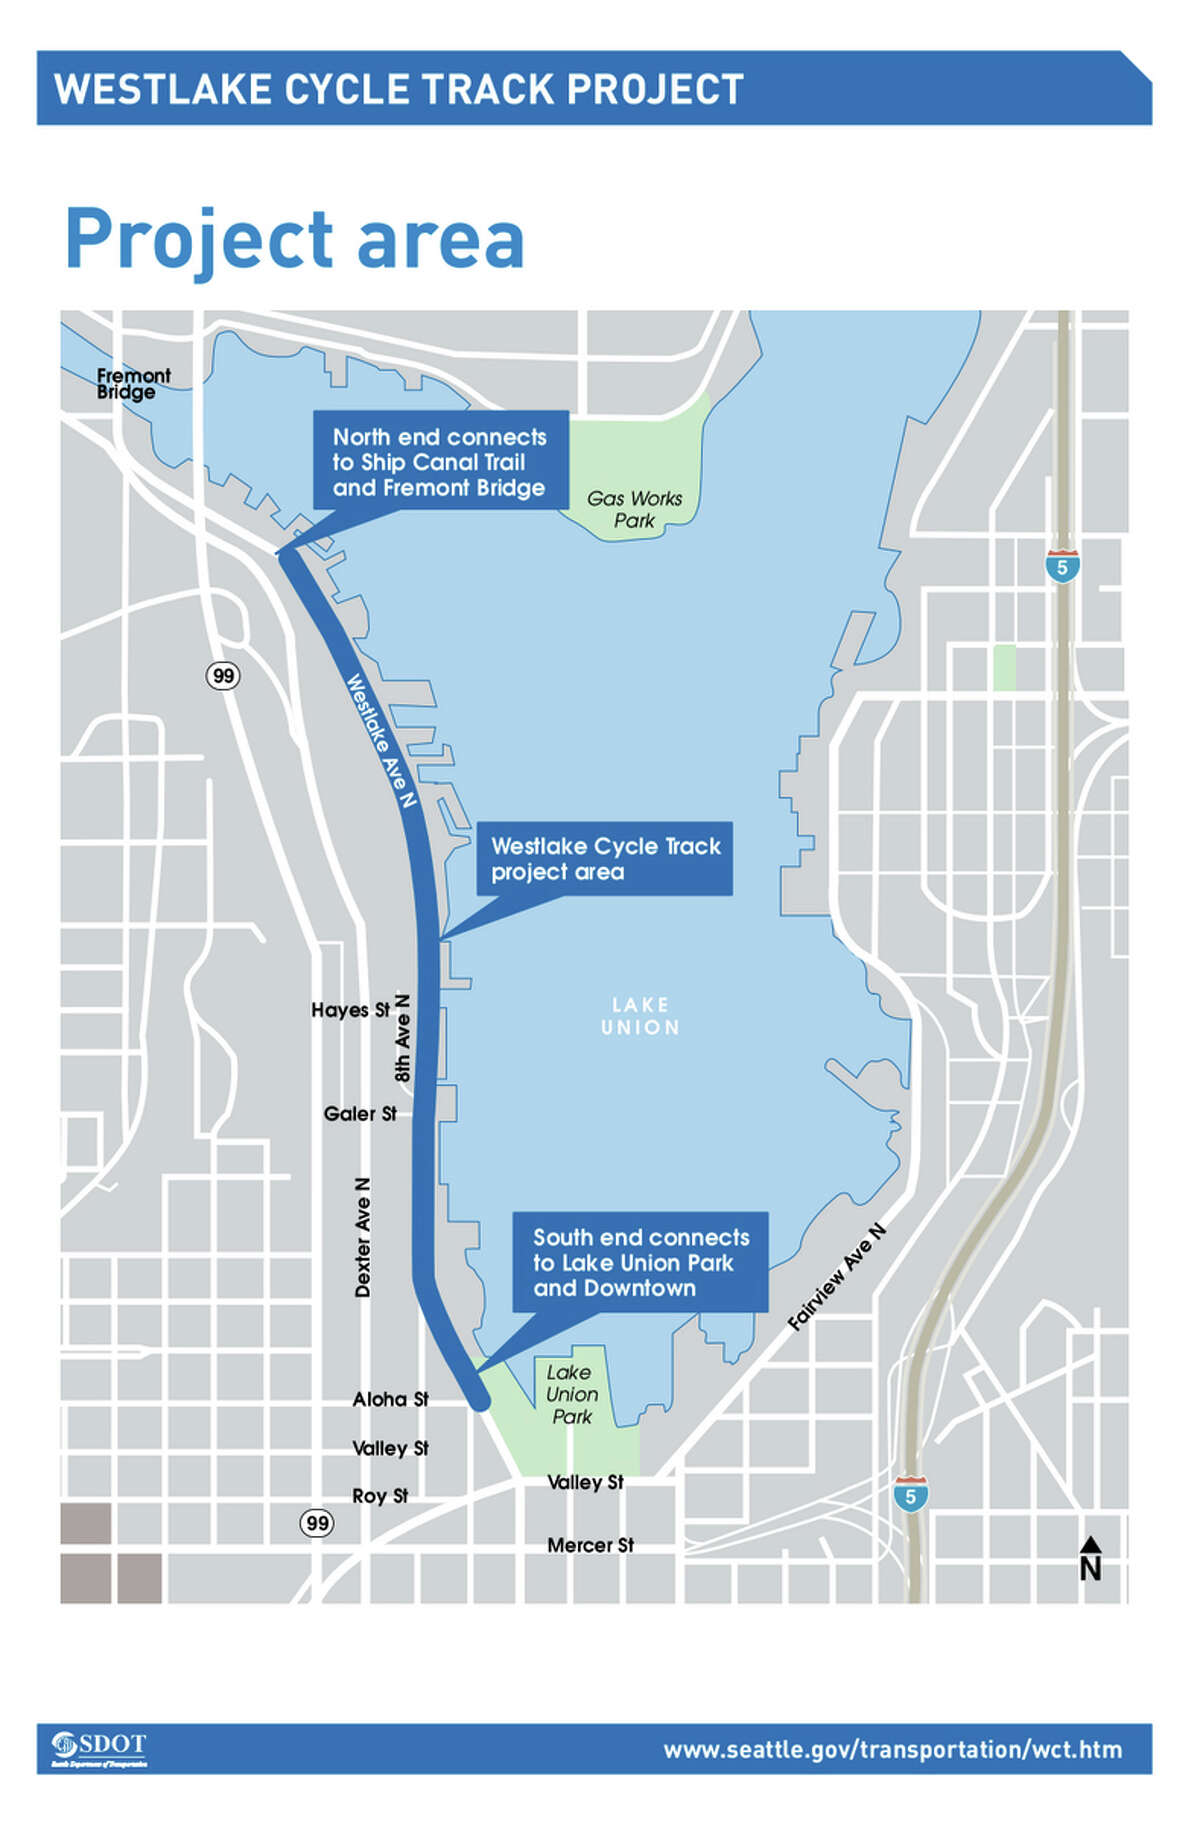 This city of Seattle map depicts the pathway of a proposed Westlake cycle track. The $3.6 million cycle track project would add 1.2 miles of protected, lighted bike path meant to connect northwest Seattle with South Lake Union and downtown.